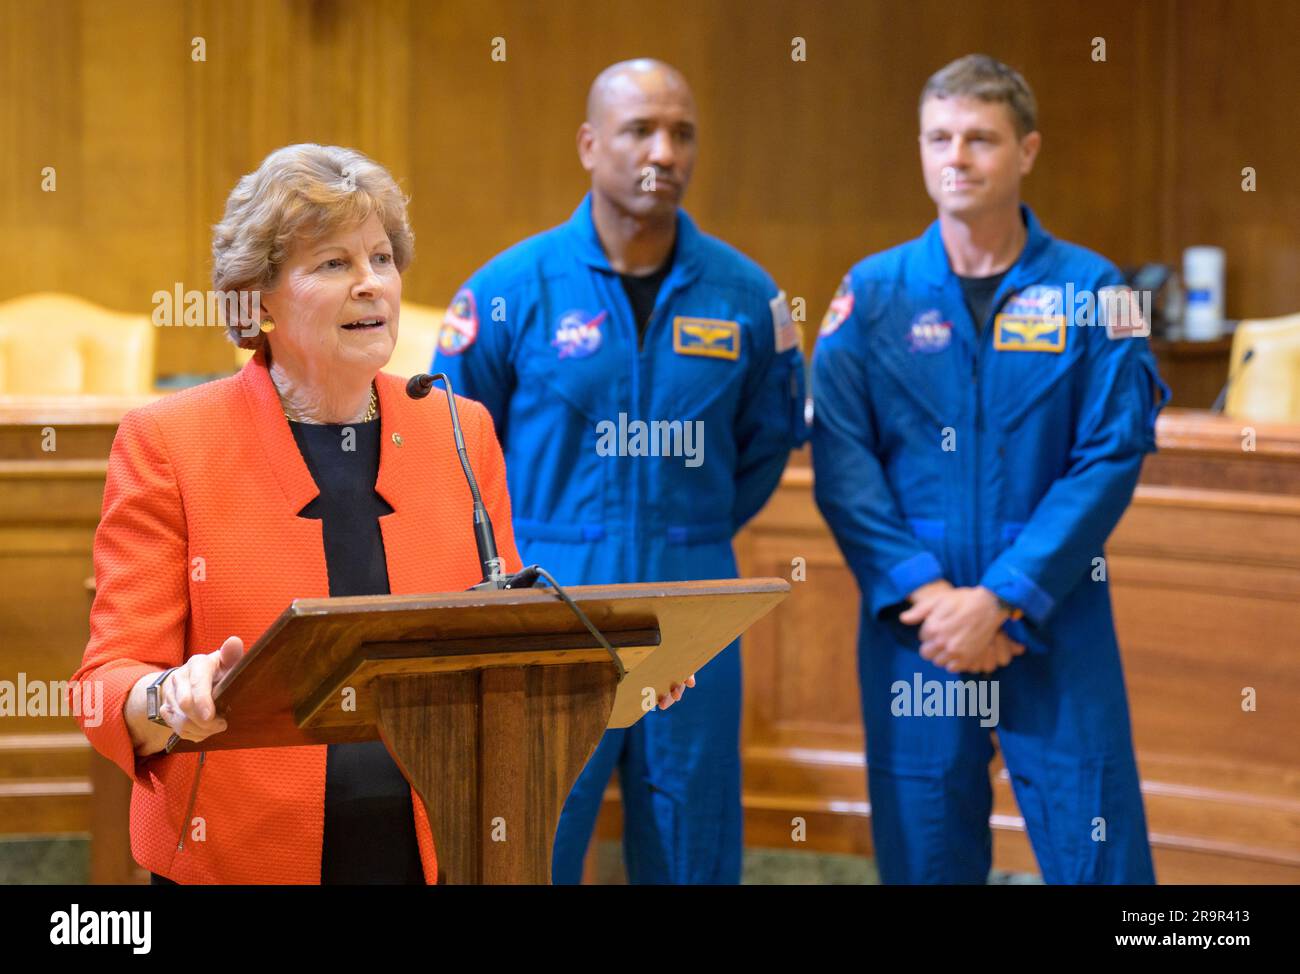 Artemis II Crew Senate Meet and Greet. Sen. Jeanne Shaheen, D-N.H., gives remarks as NASA astronauts Victor Glover, and Reid Wiseman look on during a meet and greet, Wednesday, May 17, 2023, at the Dirksen Senate Office Building in Washington. Wiseman, Glover, along with NASA Astronaut Christina Hammock Koch and CSA (Canadian Space Agency) astronaut Jeremy Hansen, who will fly around the Moon on NASA’s Artemis II flight test, visited Washington to discuss their upcoming mission with members of Congress and others. Stock Photo